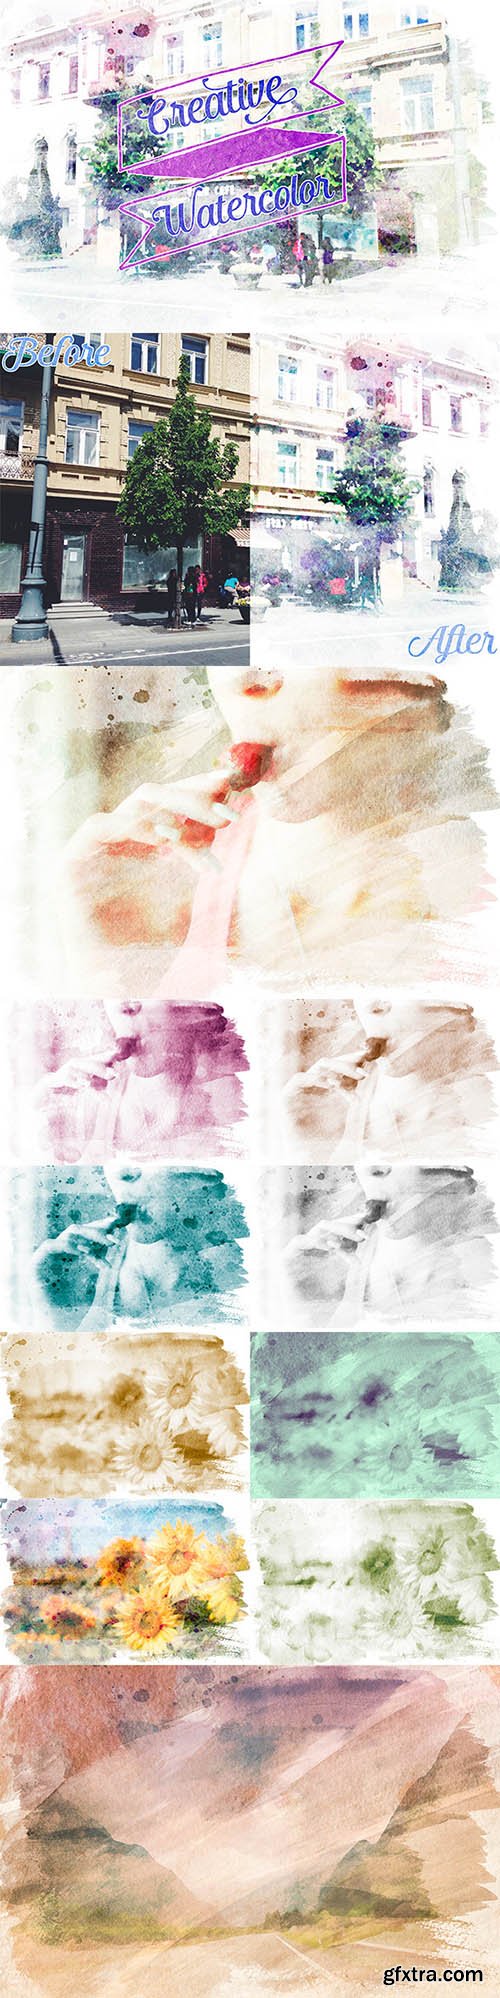 Graphicriver Creative Watercolor Painting Vol. 02 10070205